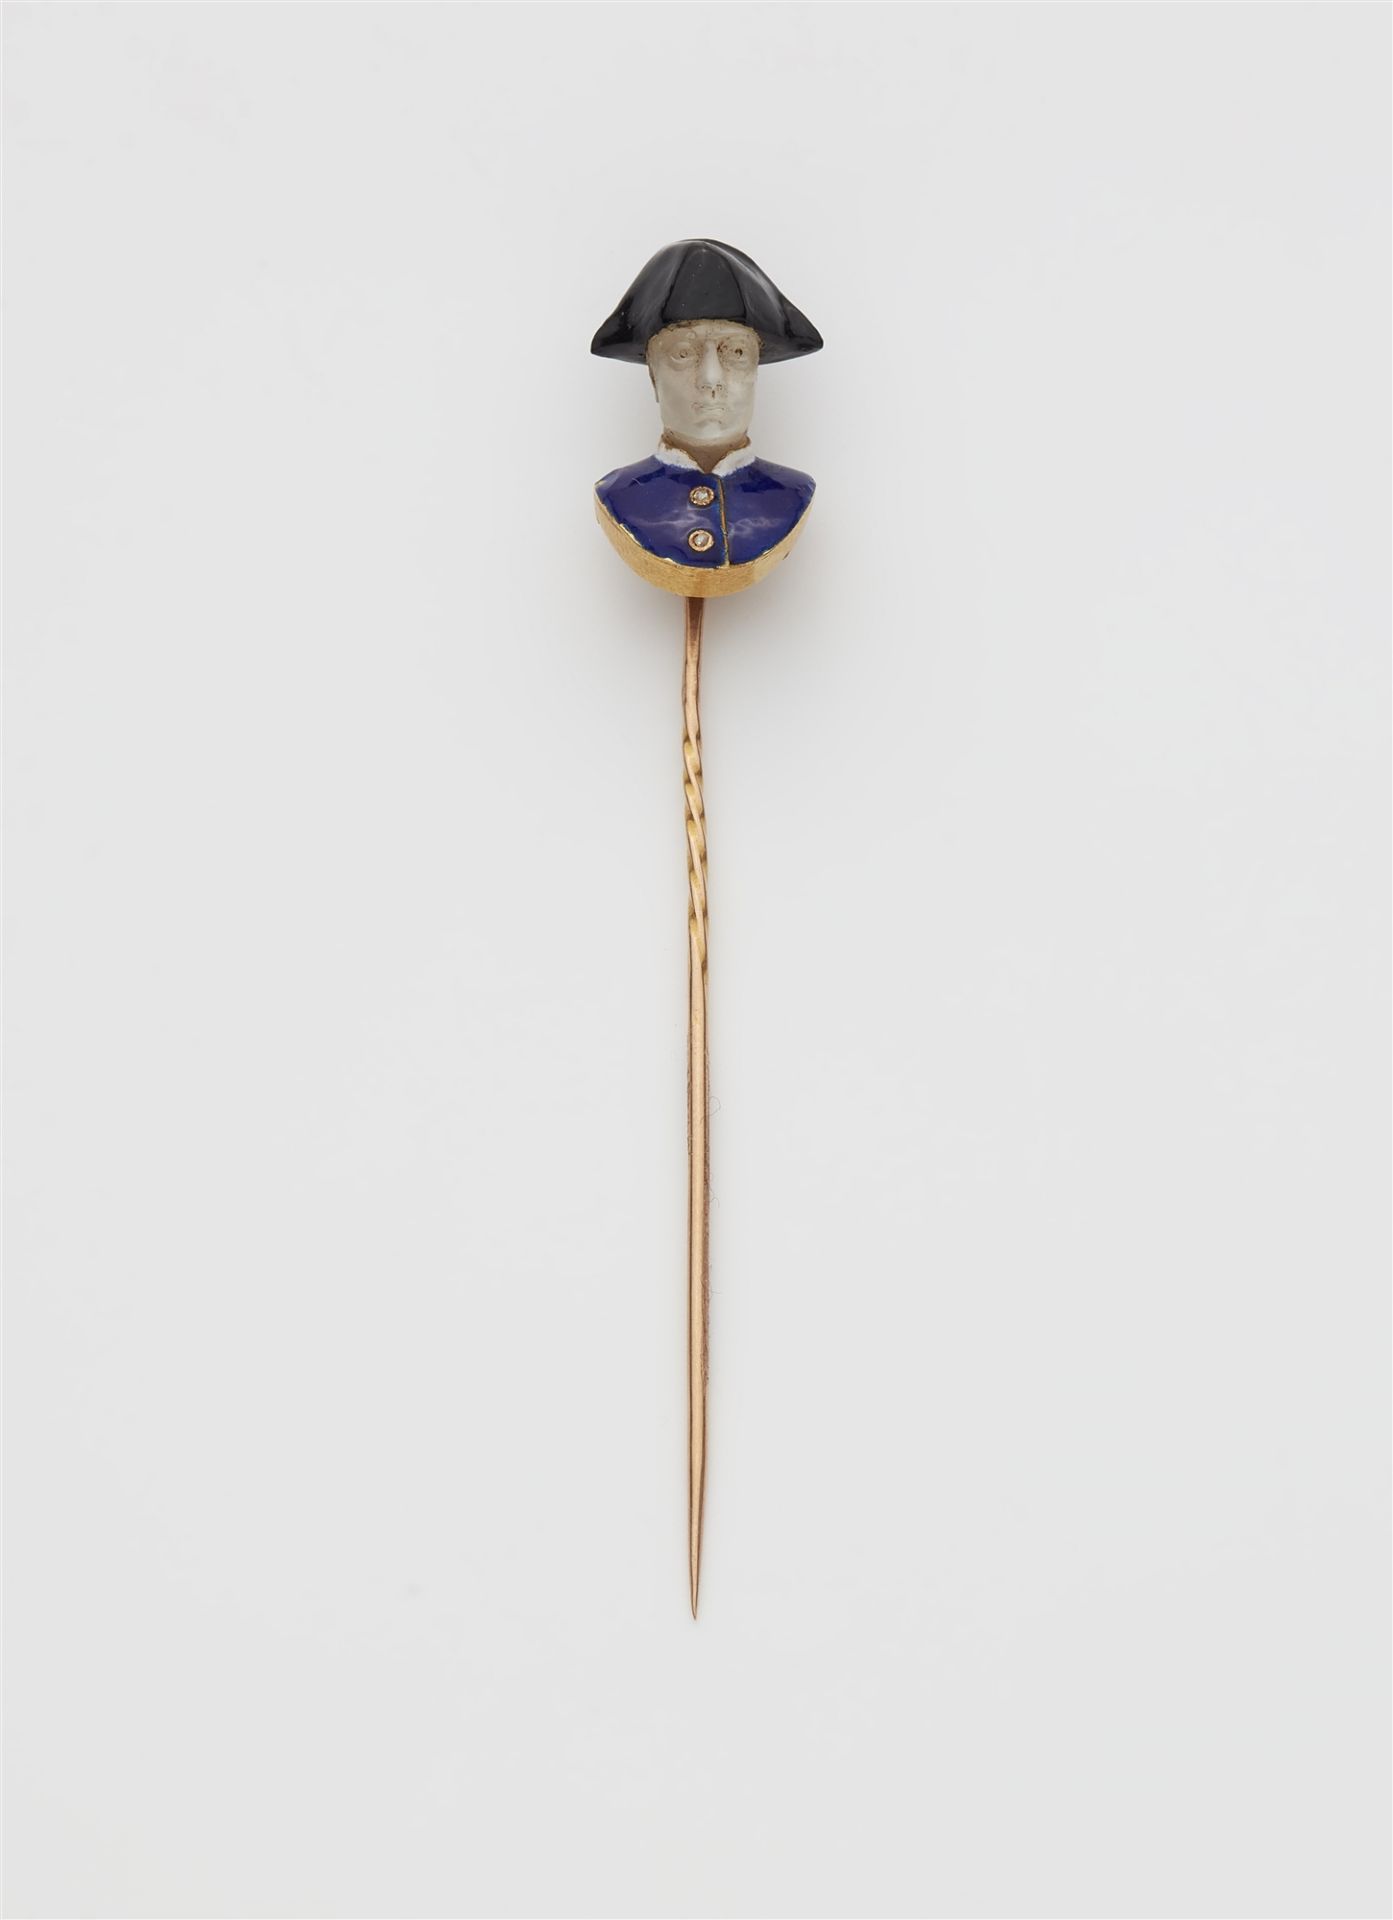 A 19th century 18k gold enamel and carved moonstone souvenir pin with bust of Napoleon Bonaparte.